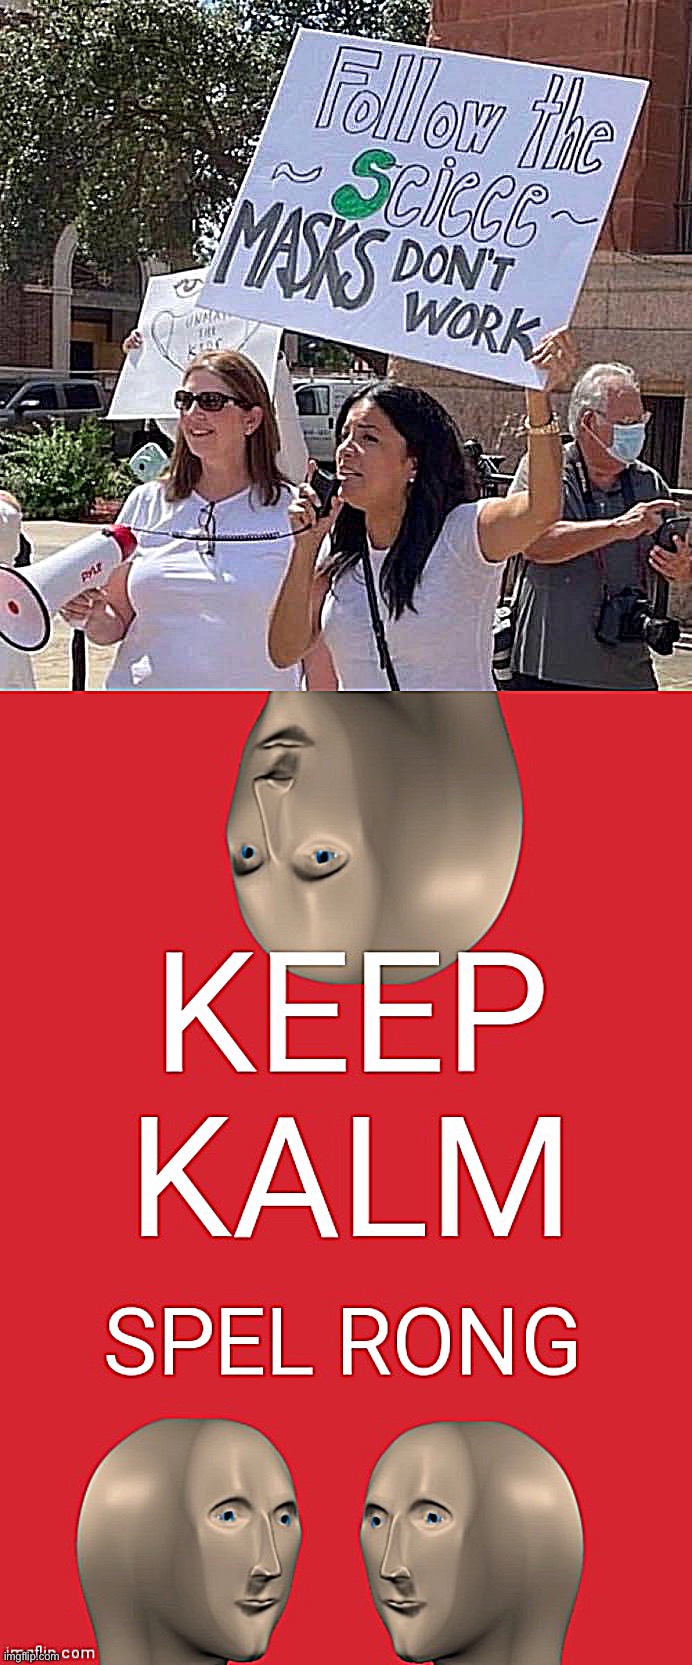 image tagged in follow the sciece,keep kalm spel rong | made w/ Imgflip meme maker